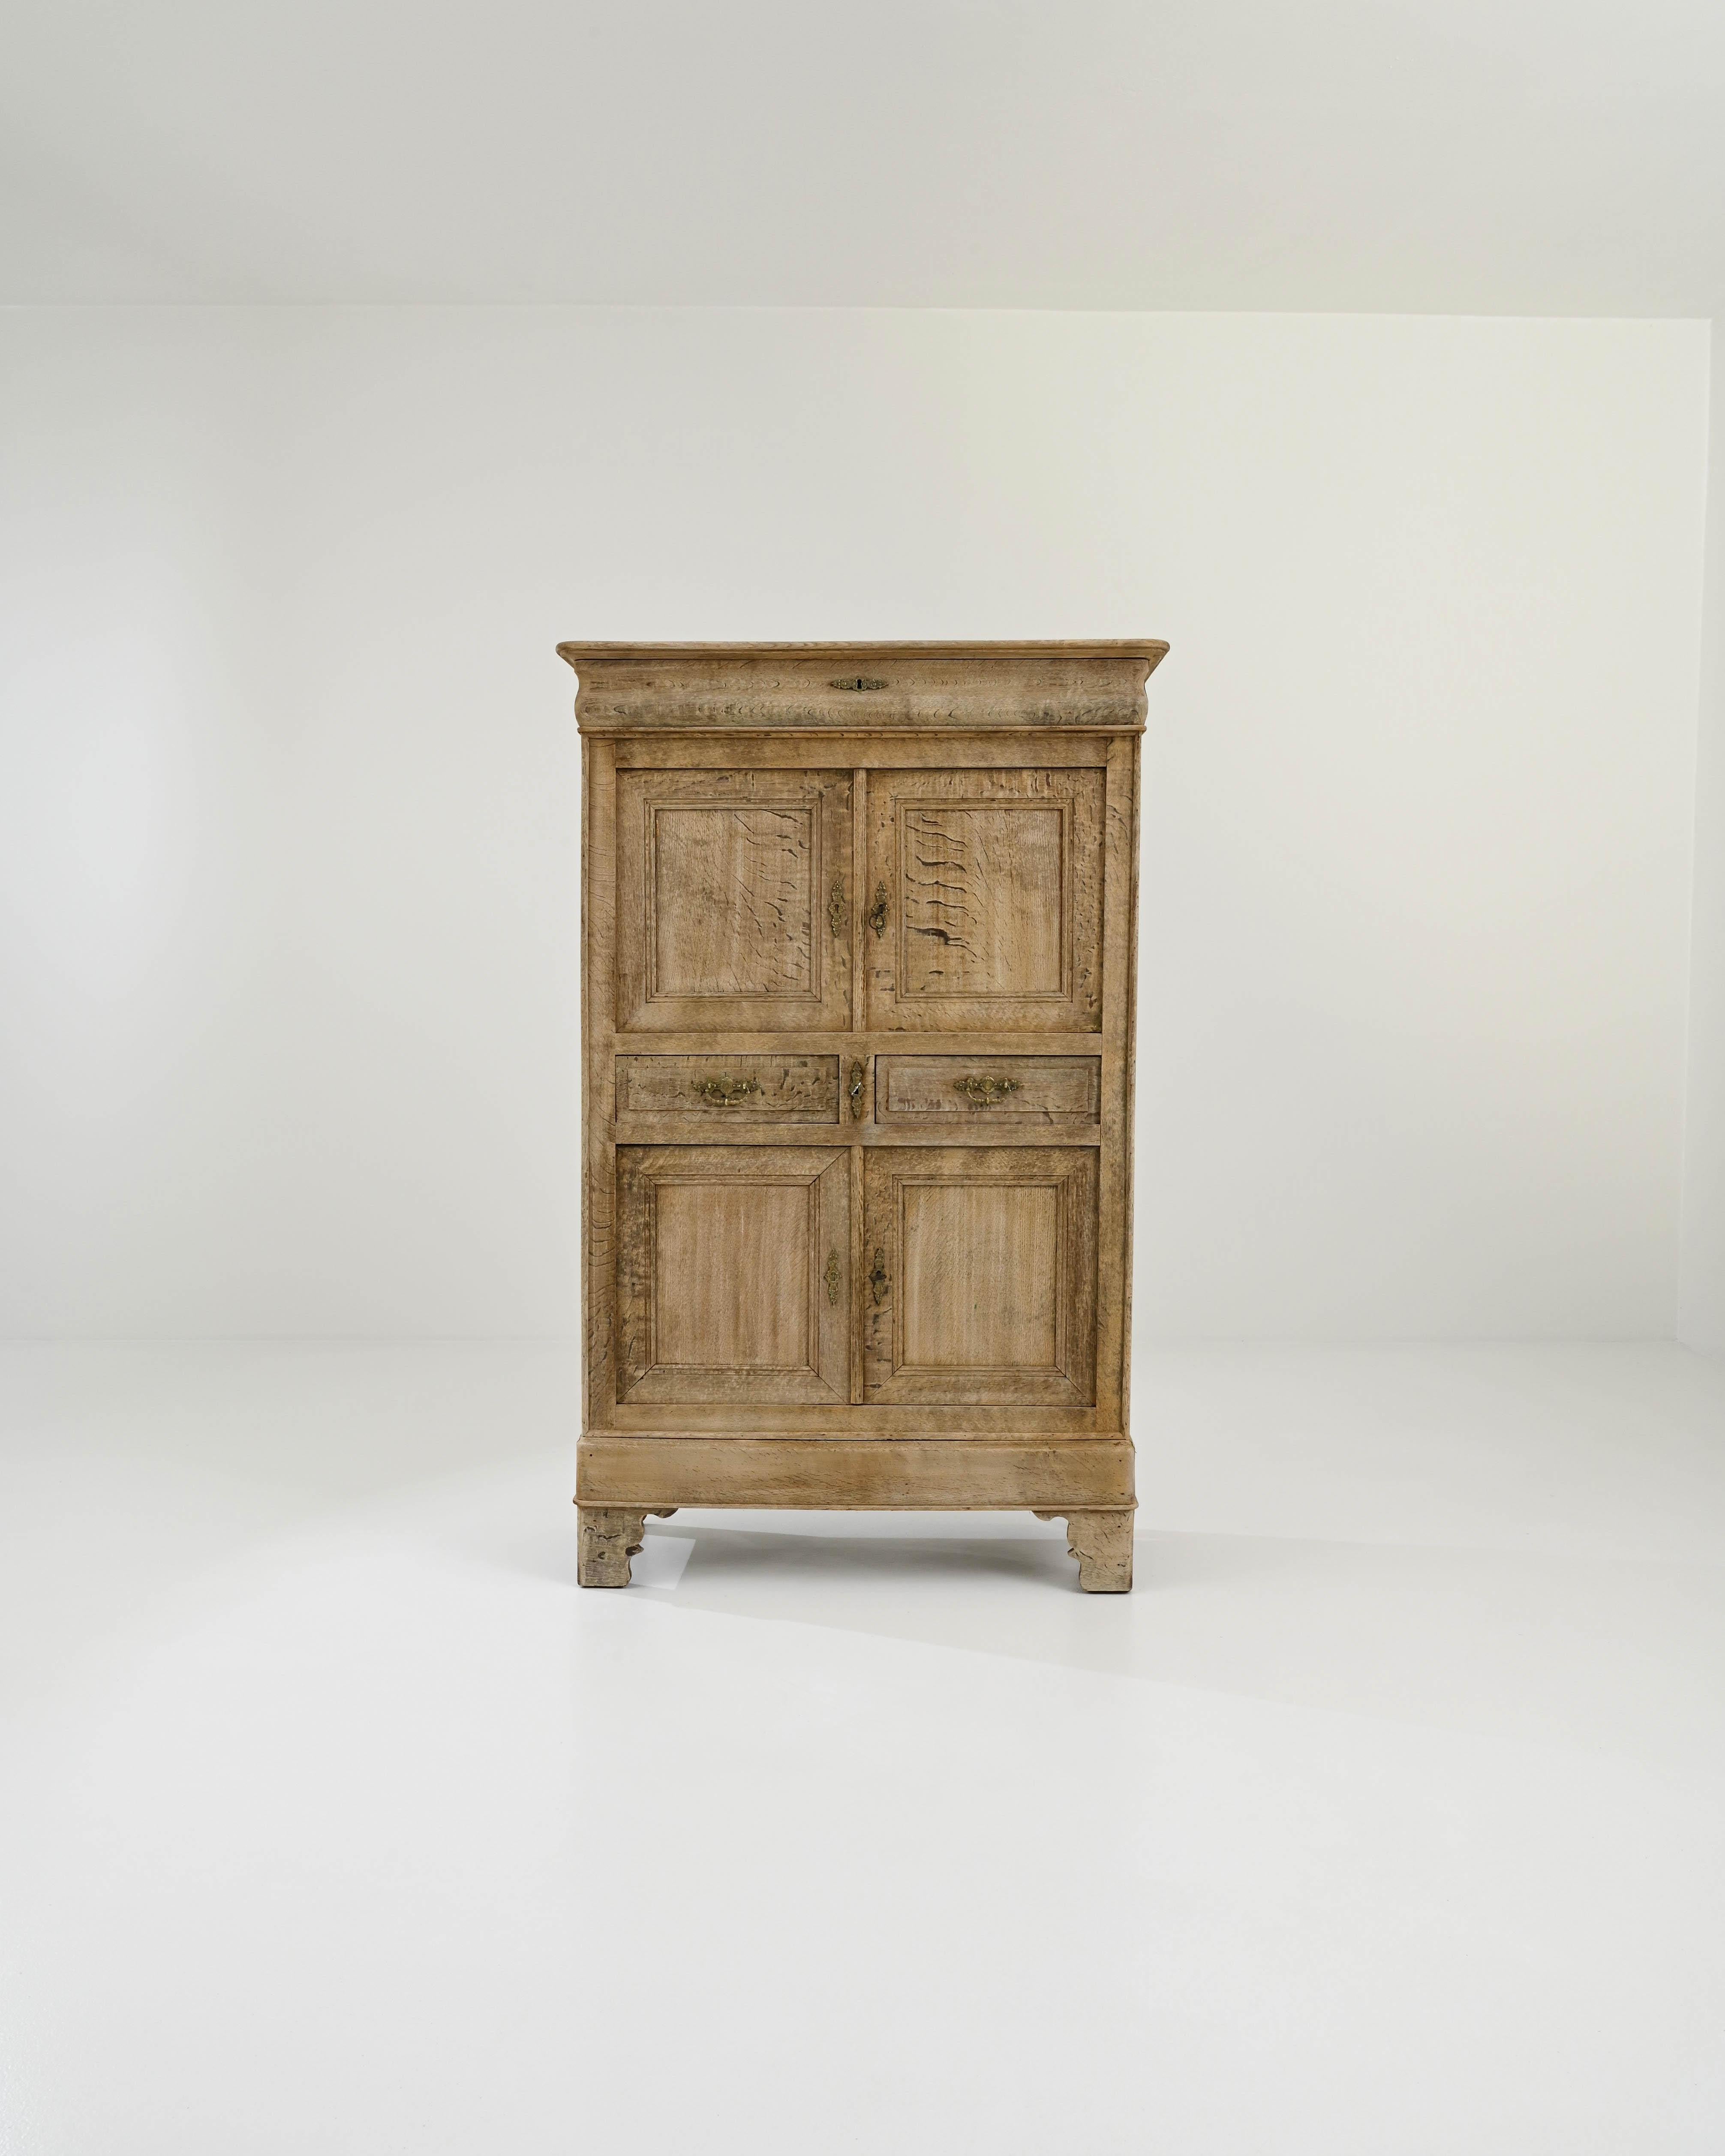 A wooden cabinet created in 19th century France. This tall sideboard cabinet opens its drawers in a welcoming expression. Elegant and traditional, the drawer panels, keyholes, and drawer pulls all have thoughtfully shaped curves and designs, which